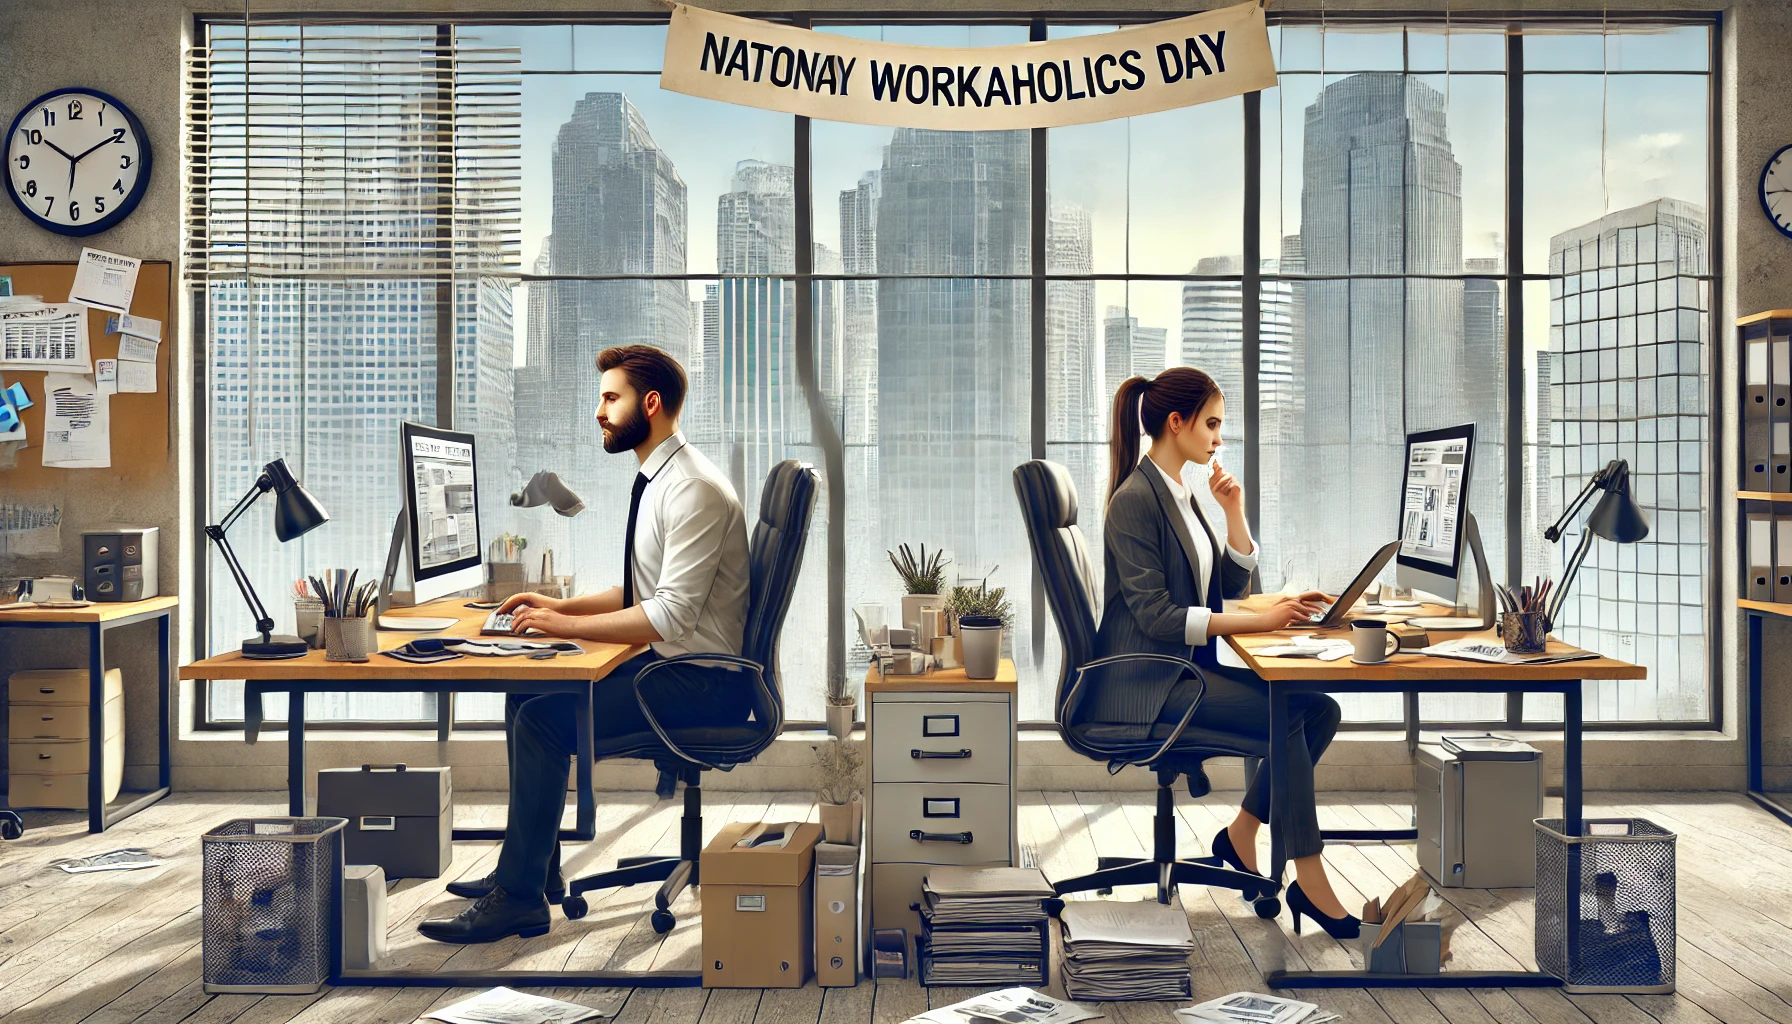 National Workaholics Day